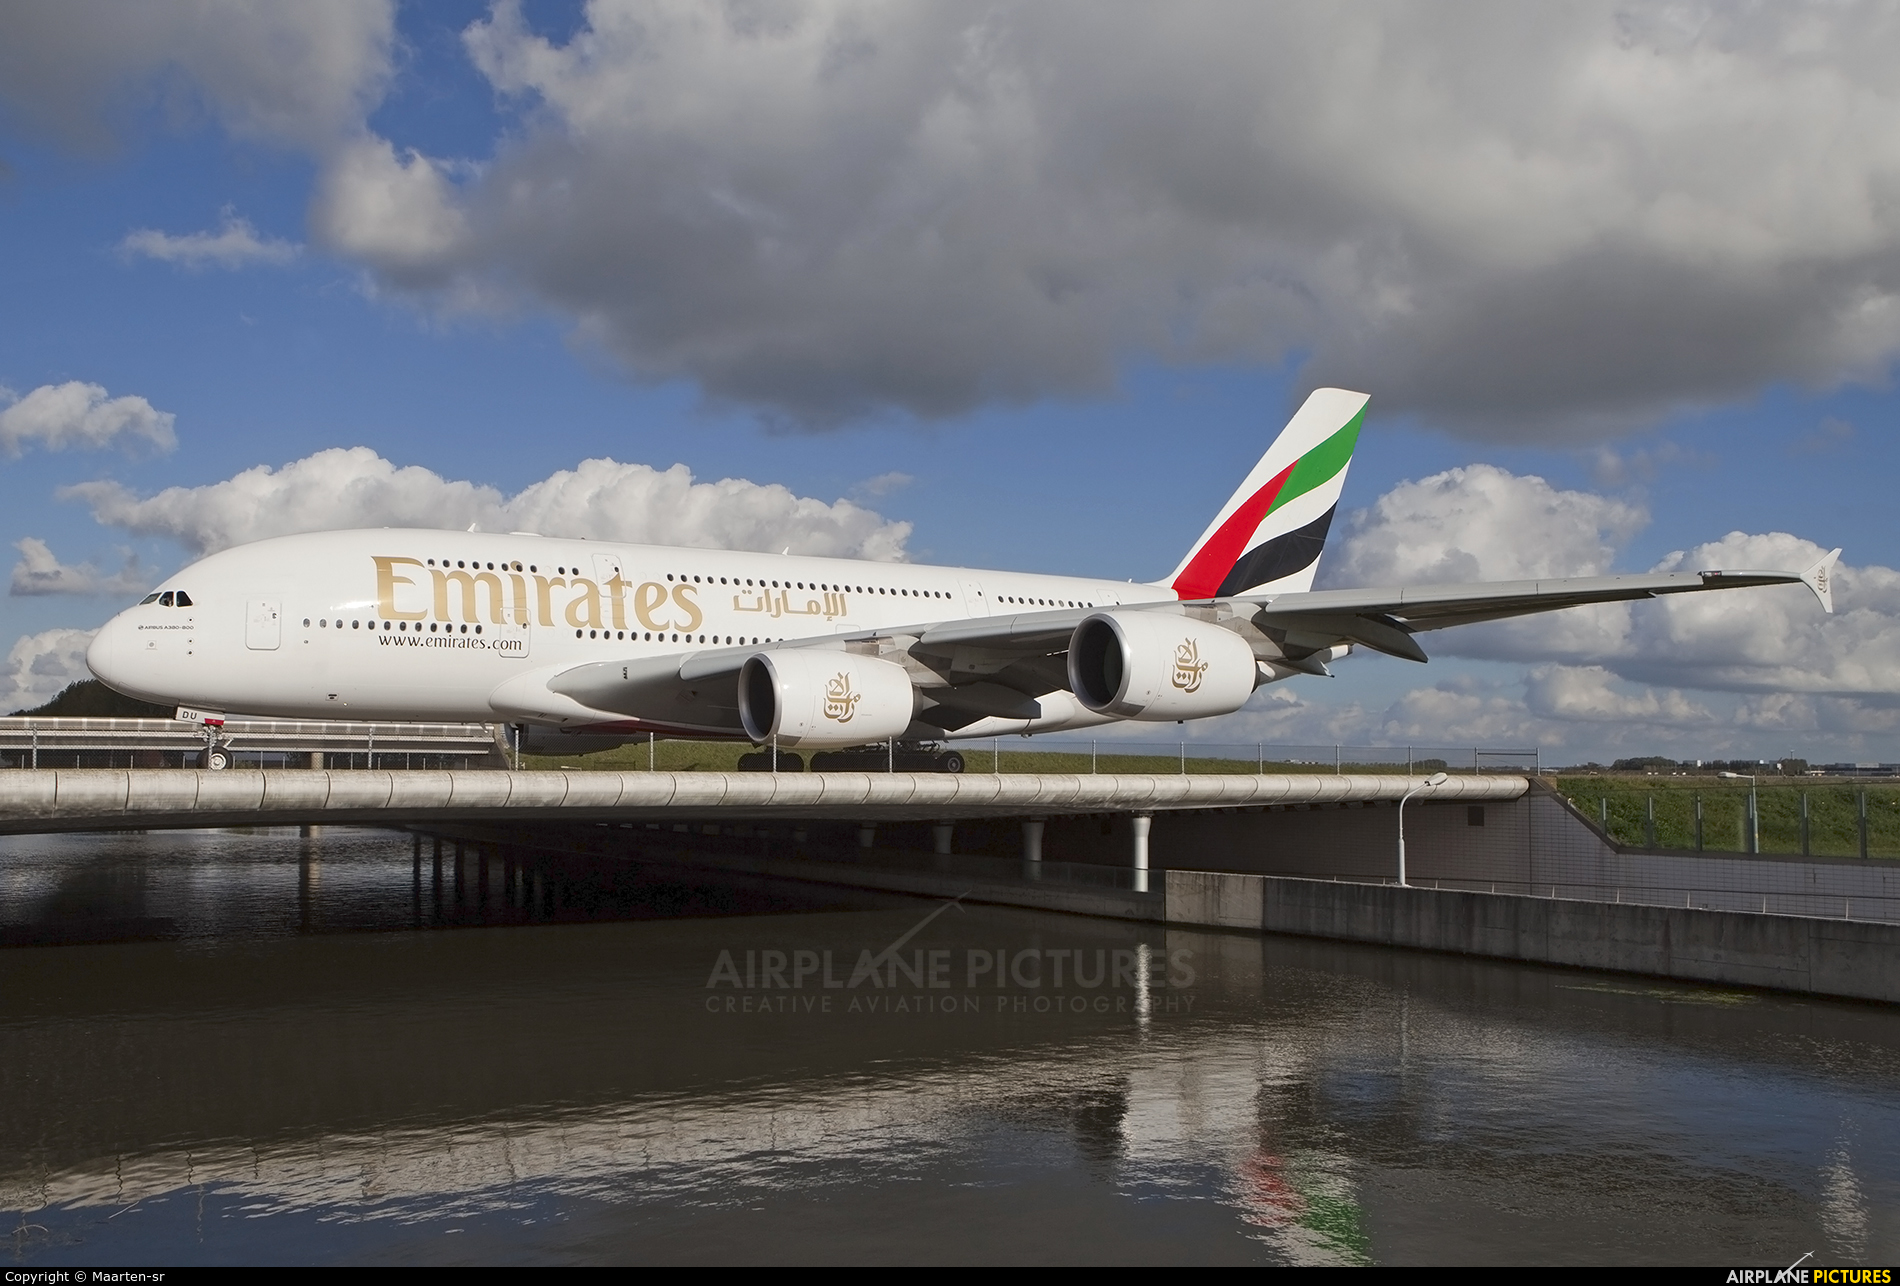 Emirates Airlines A6-EDU aircraft at Amsterdam - Schiphol